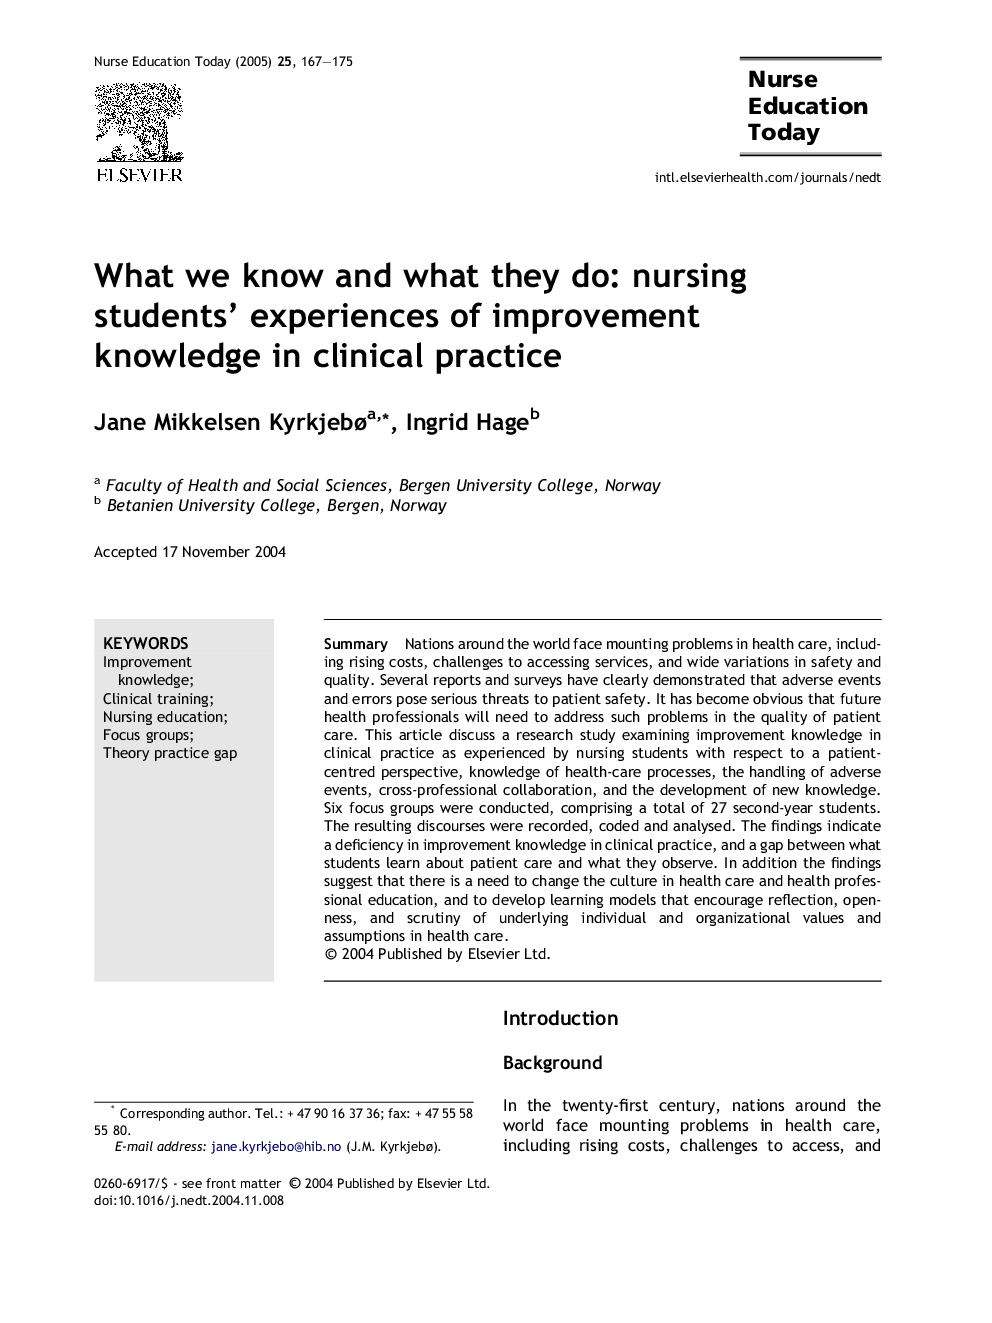 What we know and what they do: nursing students' experiences of improvement knowledge in clinical practice